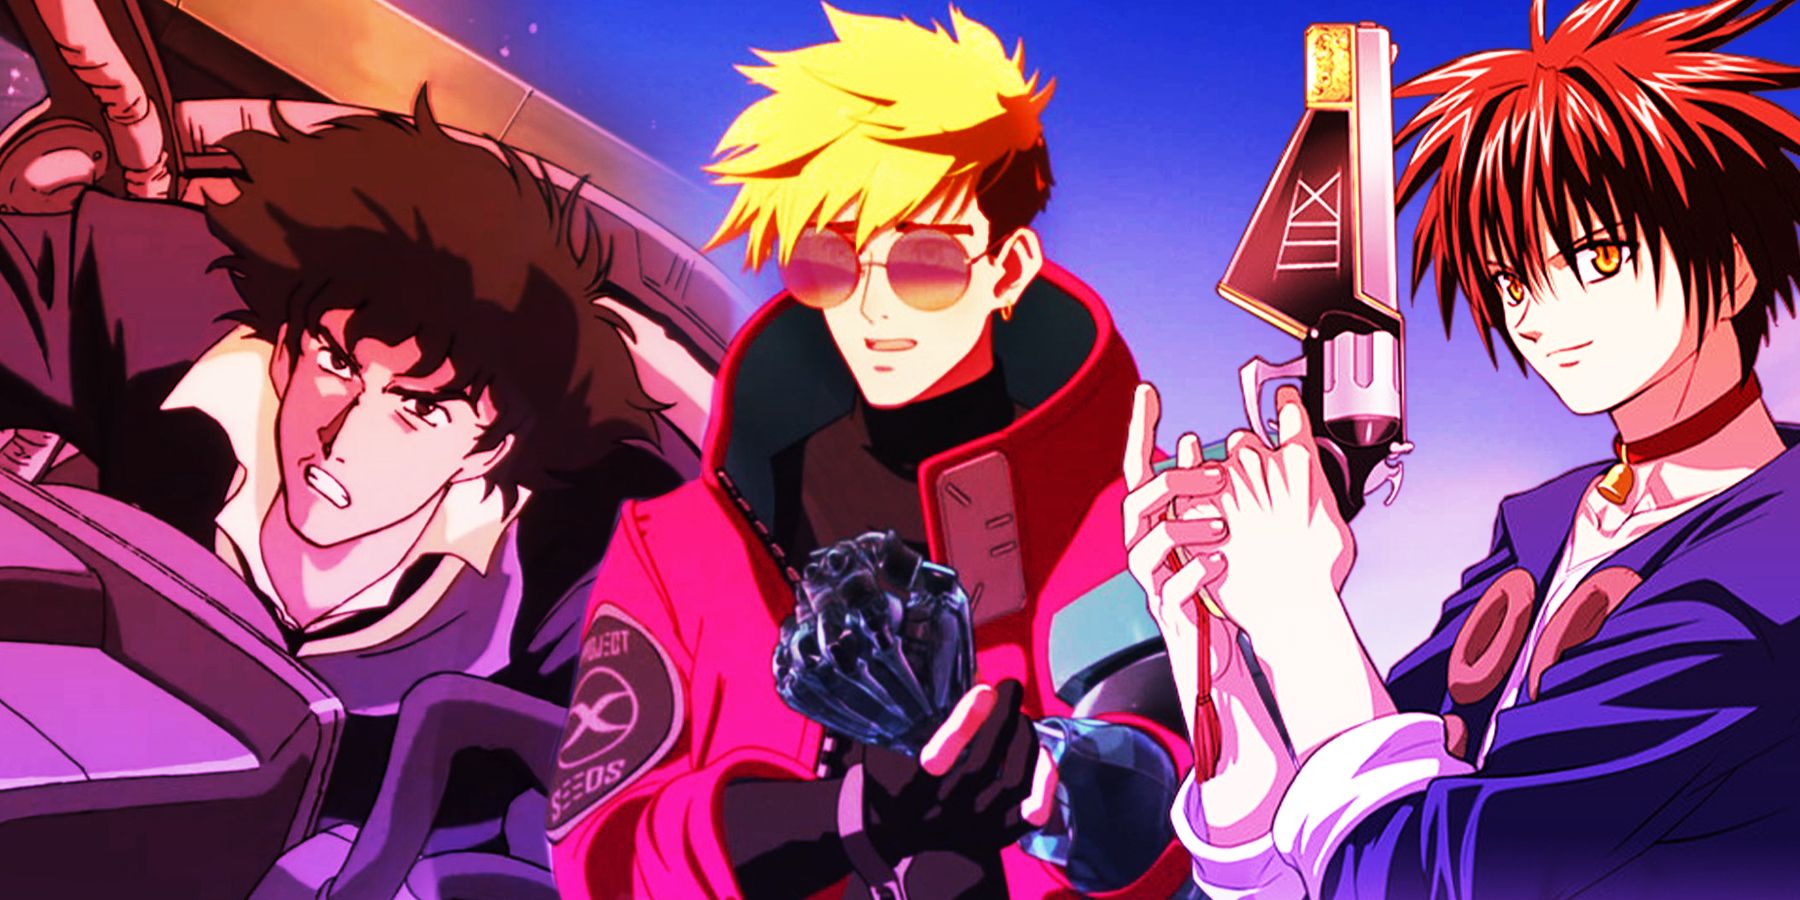 Spike from Cowboy Bebop (left), Vash from Trigun Stampede (center) and Train Heartnet from Black Cat (right)